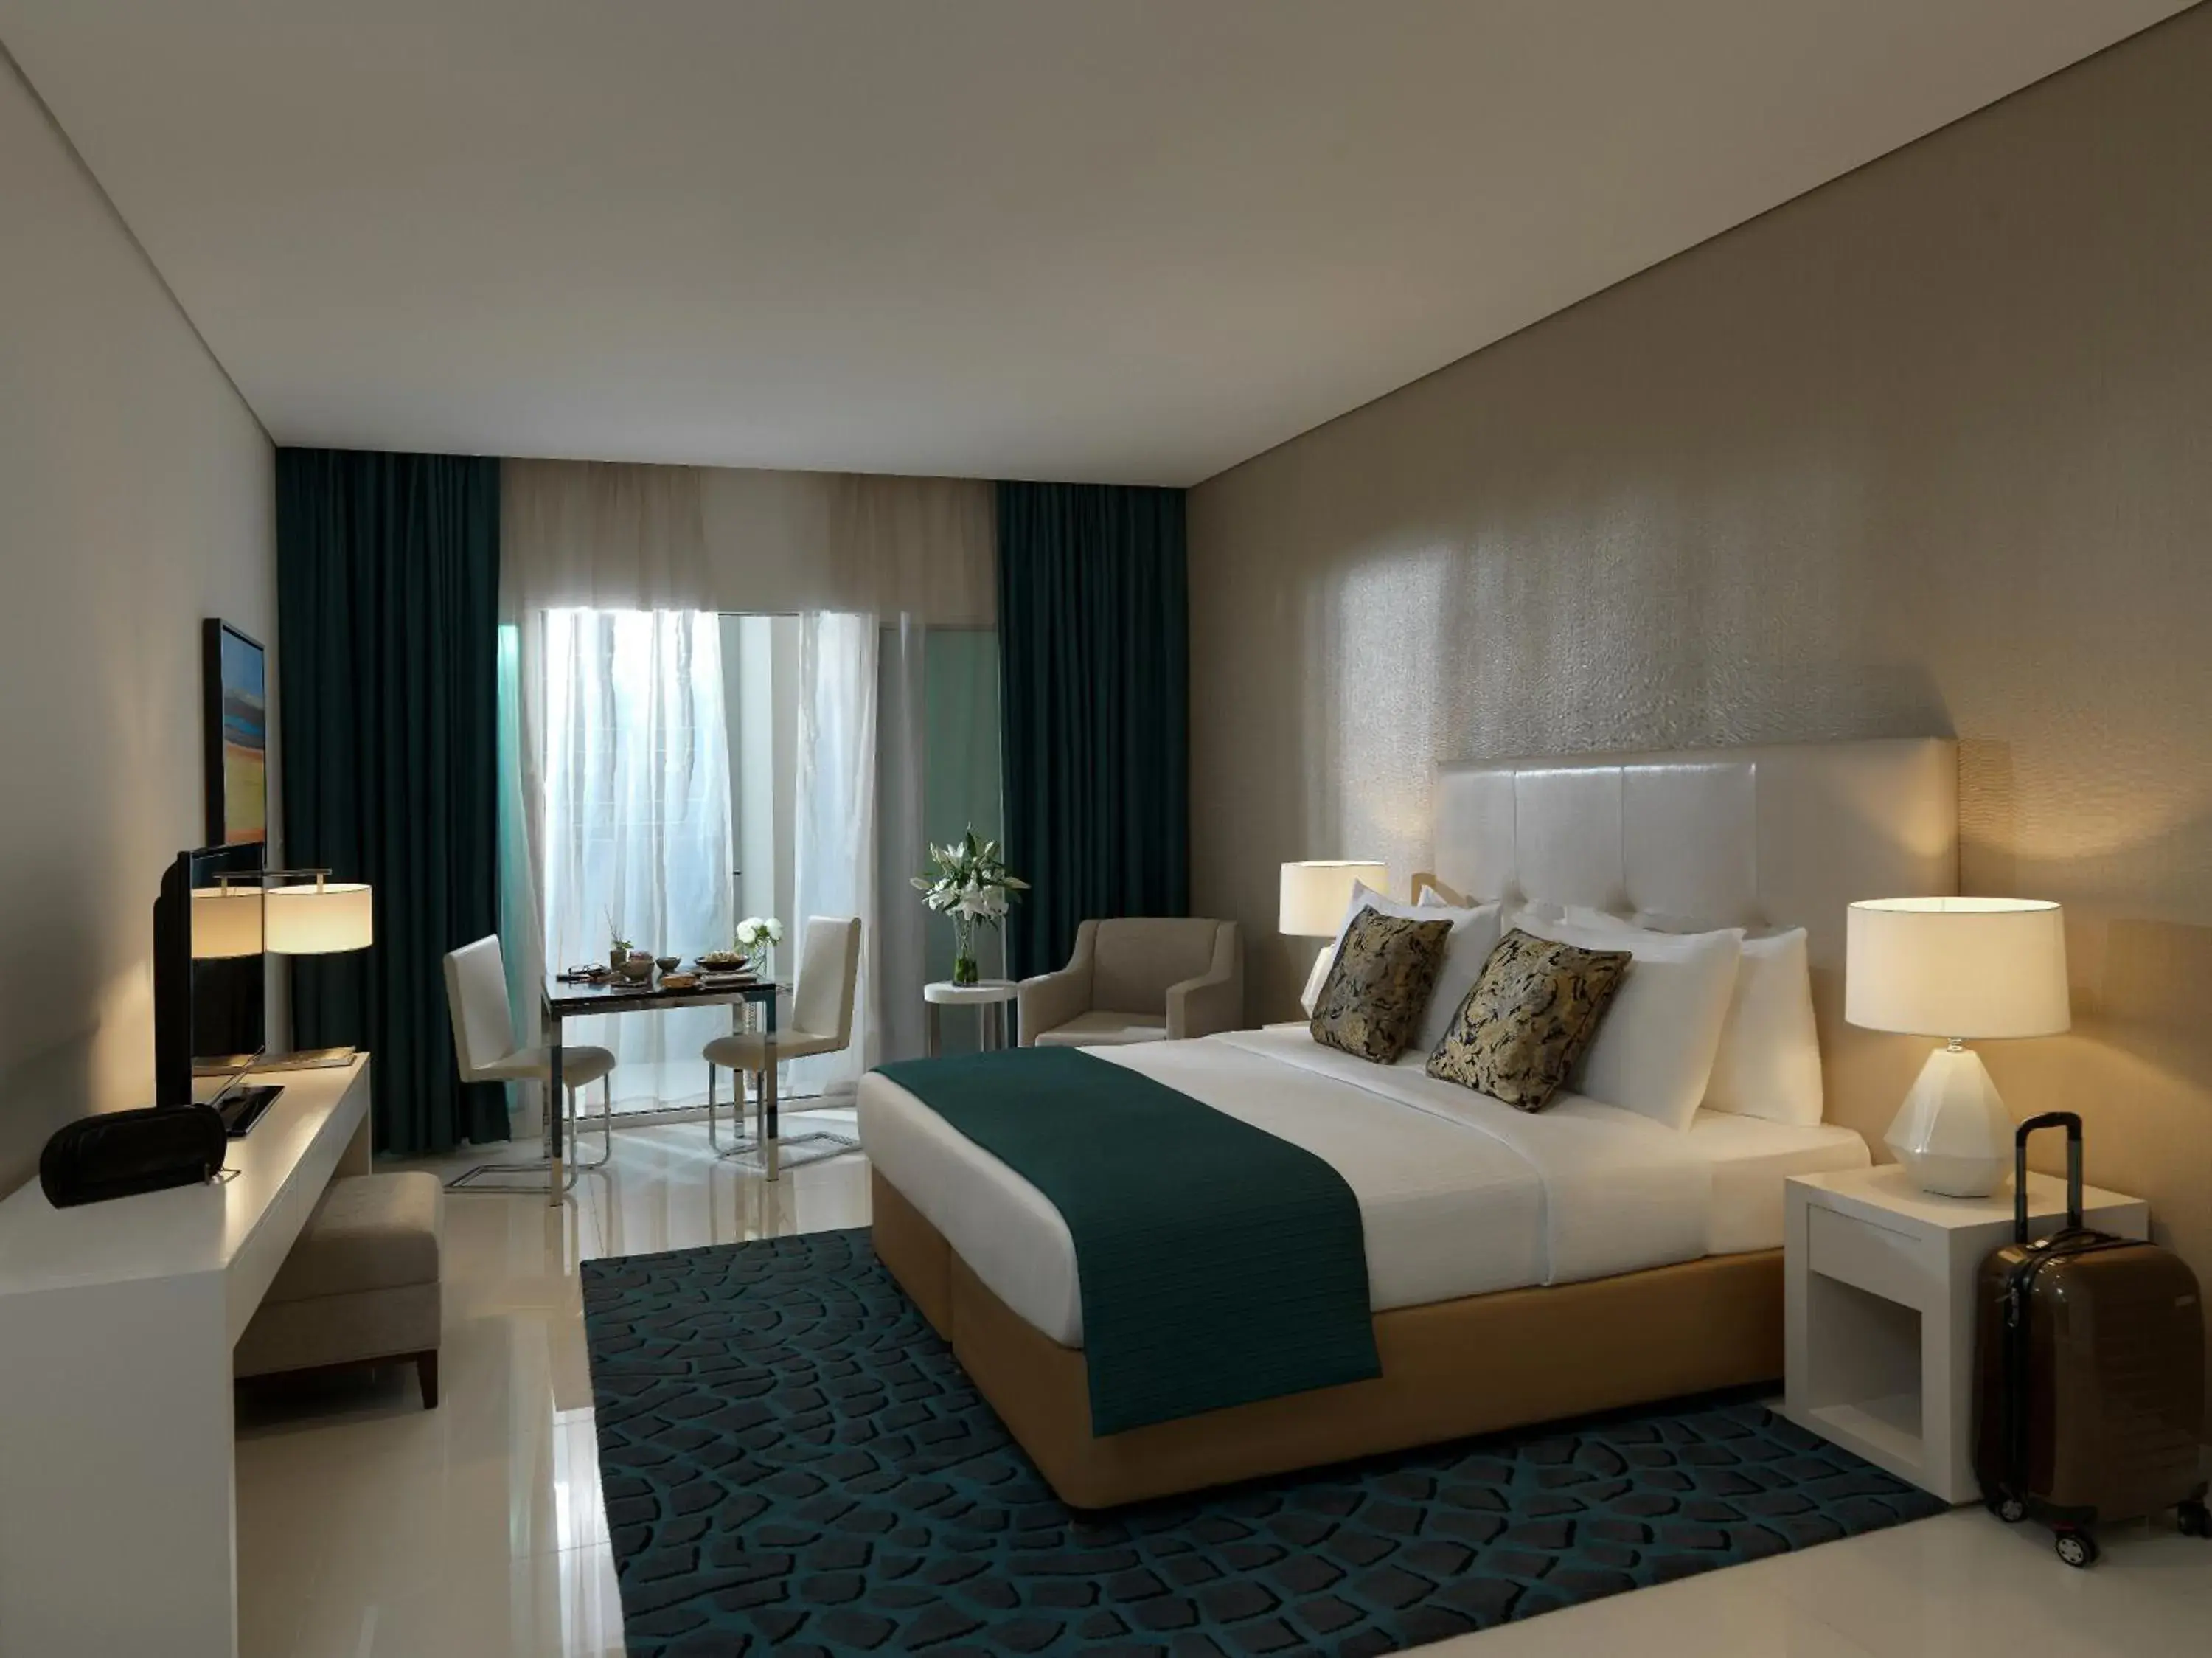 Bed, Room Photo in Damac Maison Cour Jardin